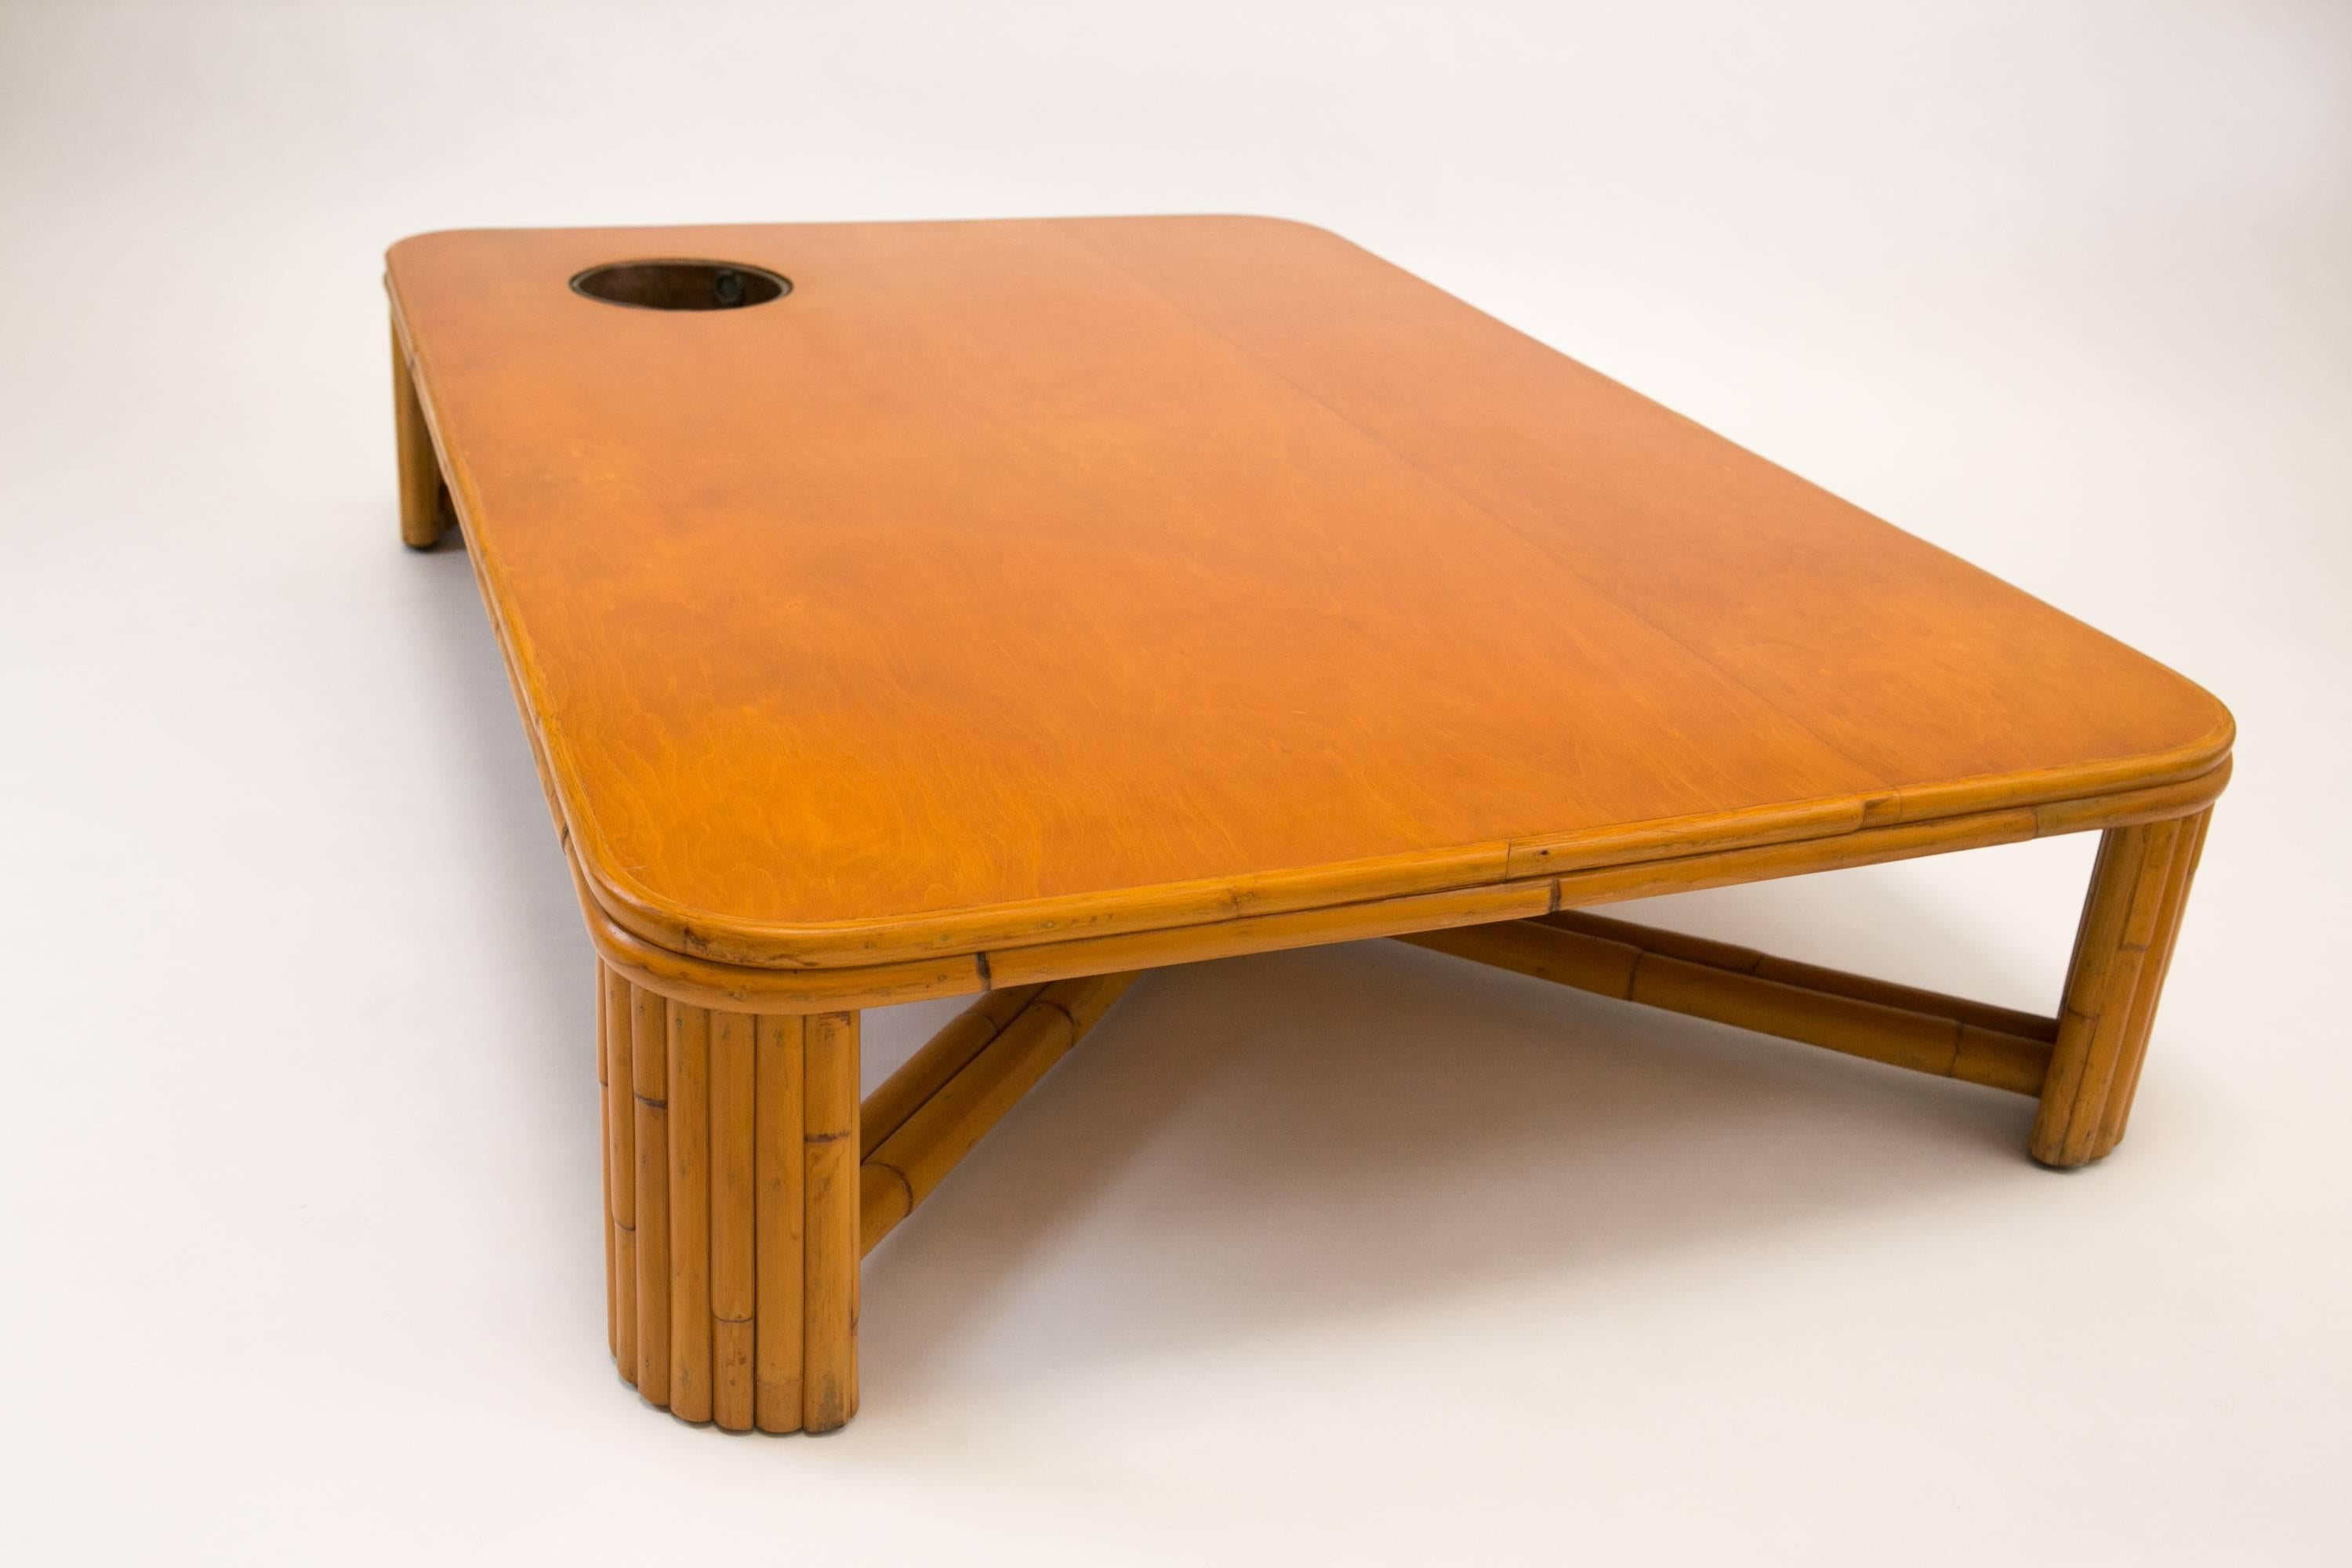 A rectangular bamboo coffee table, rounded corners and feet.
Swedish work edited by Svenskt Tenn, dating from the 1960s.